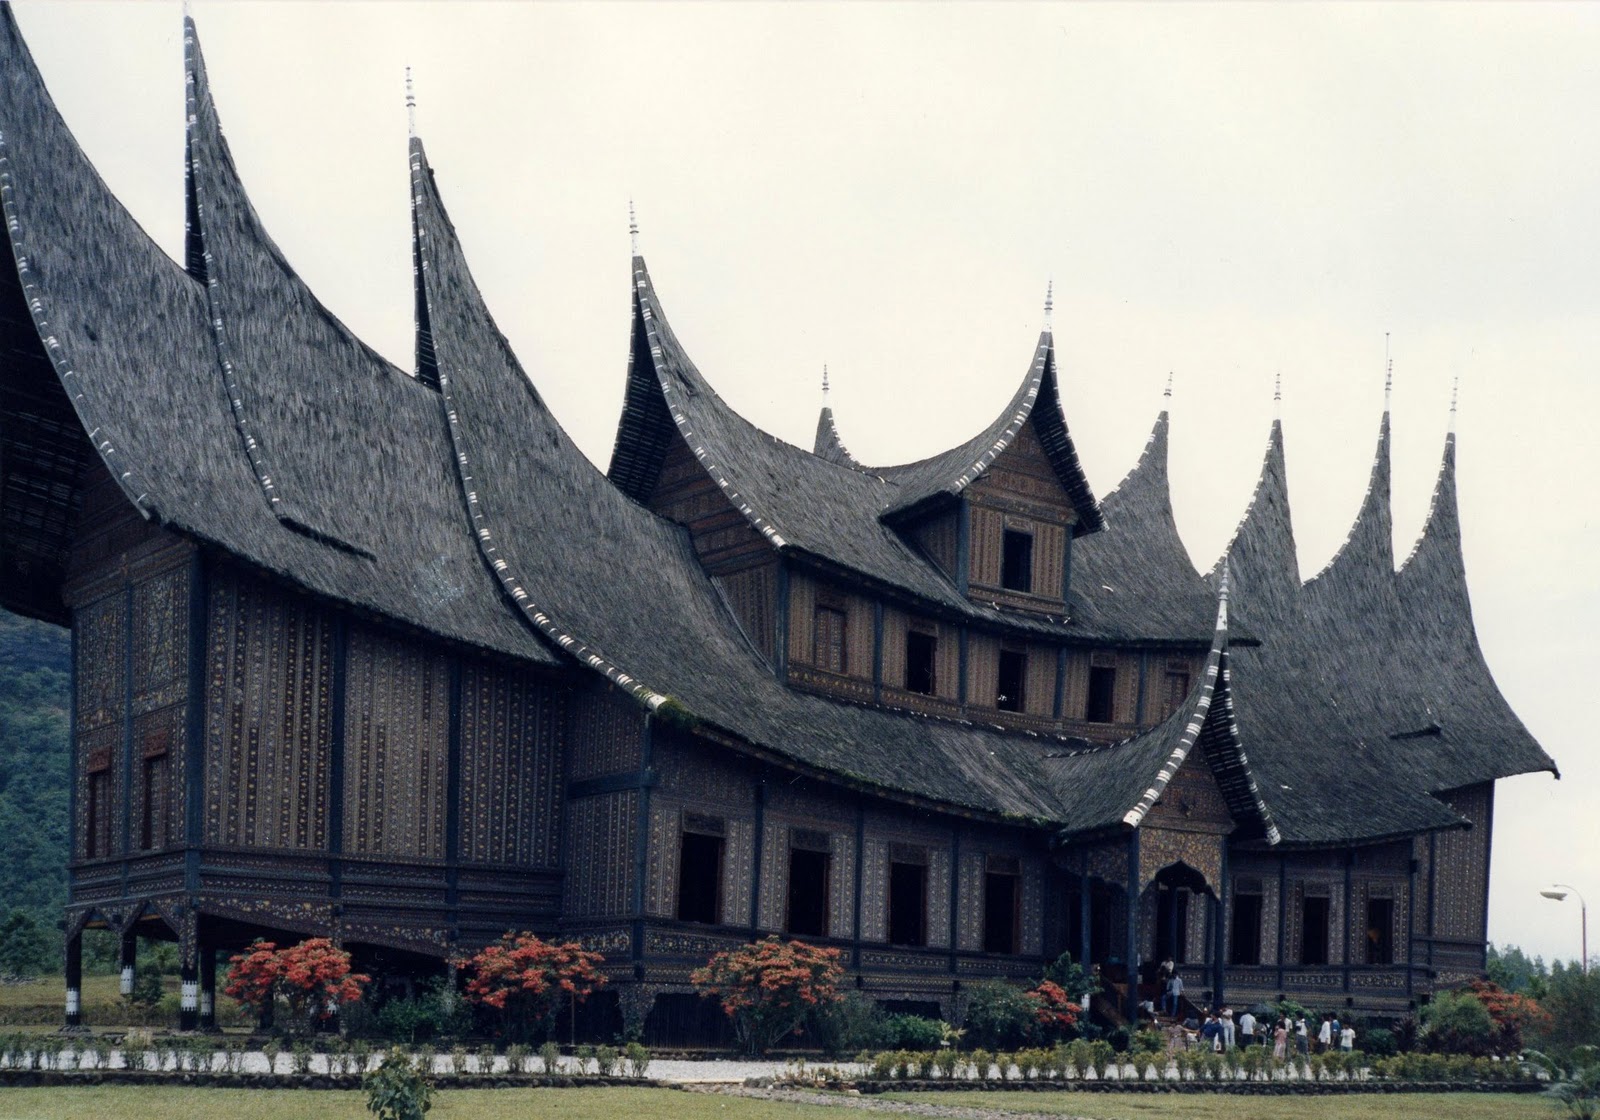 The Architecture of Indonesia - The Fact Of Indonesia